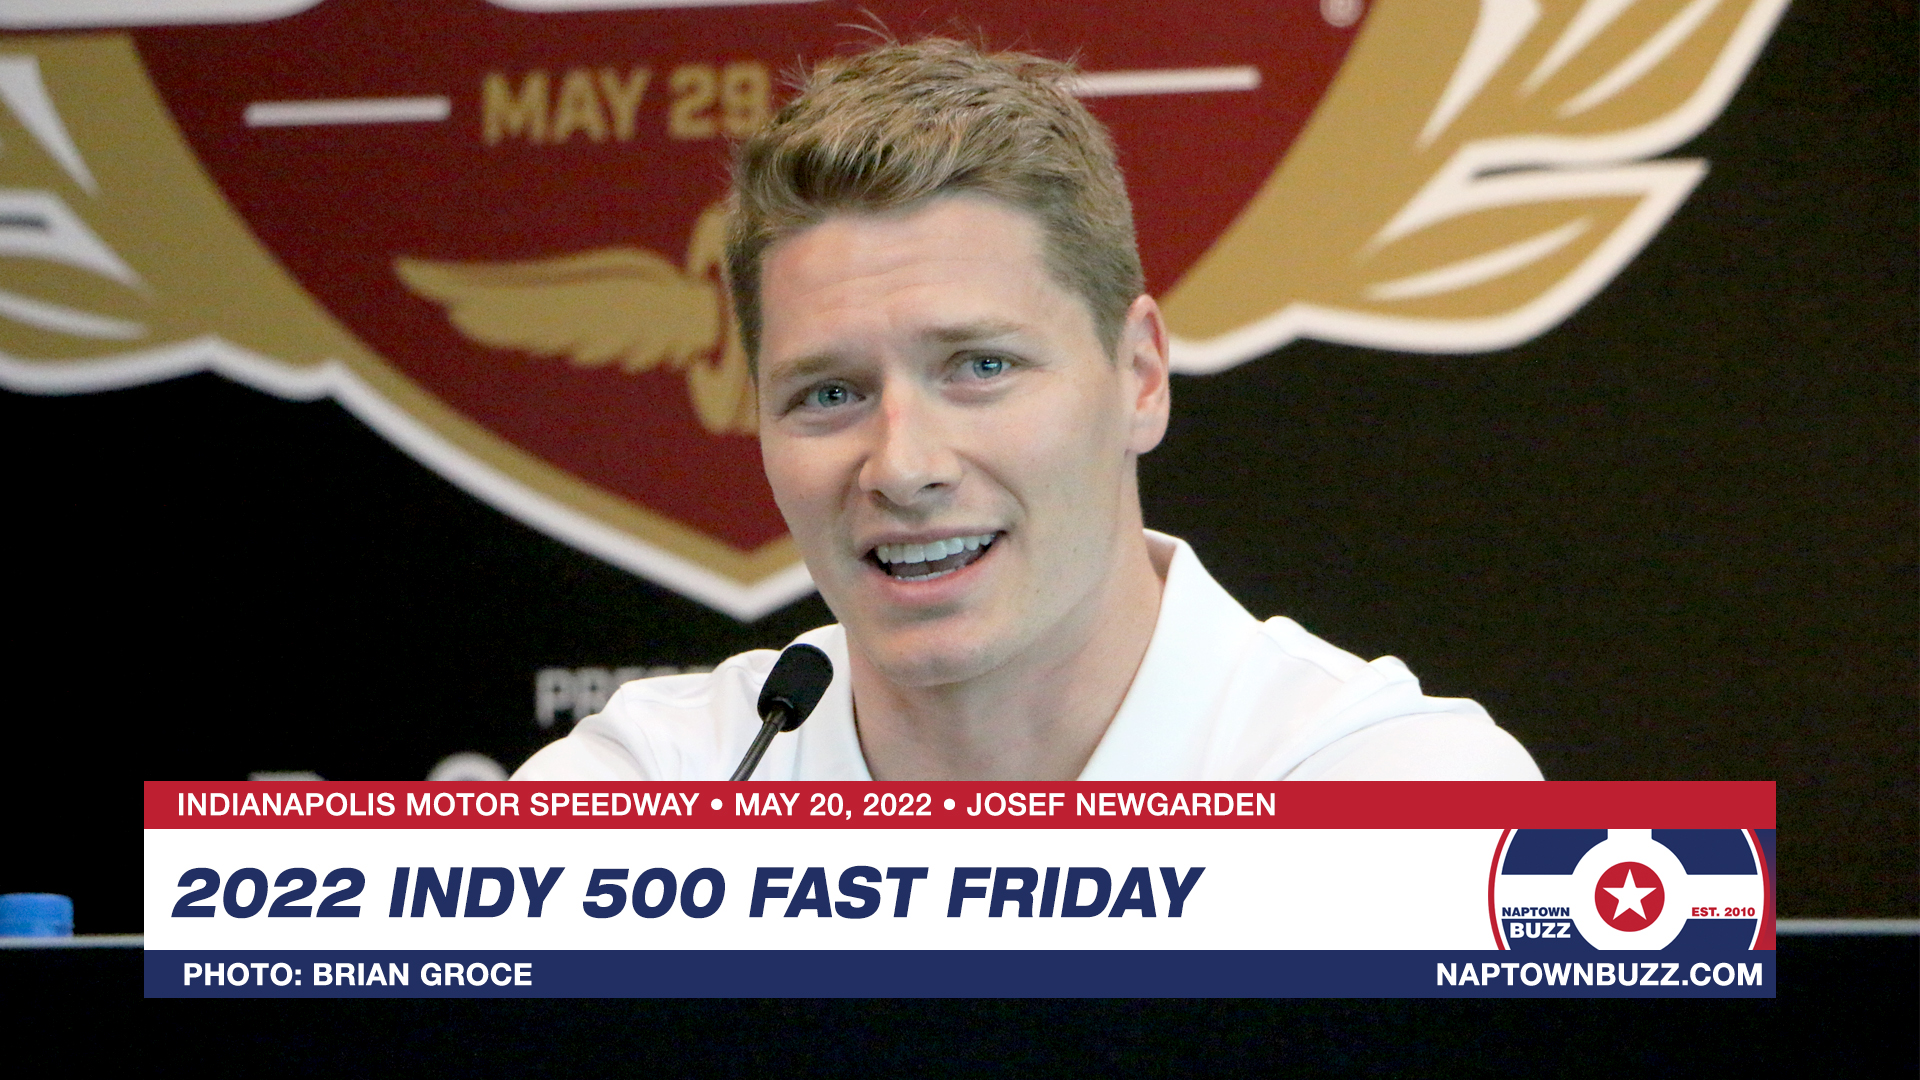 Josef Newgarden on Indy 500 Fast Friday Practice at Indianapolis Motor Speedway on May 20, 2022